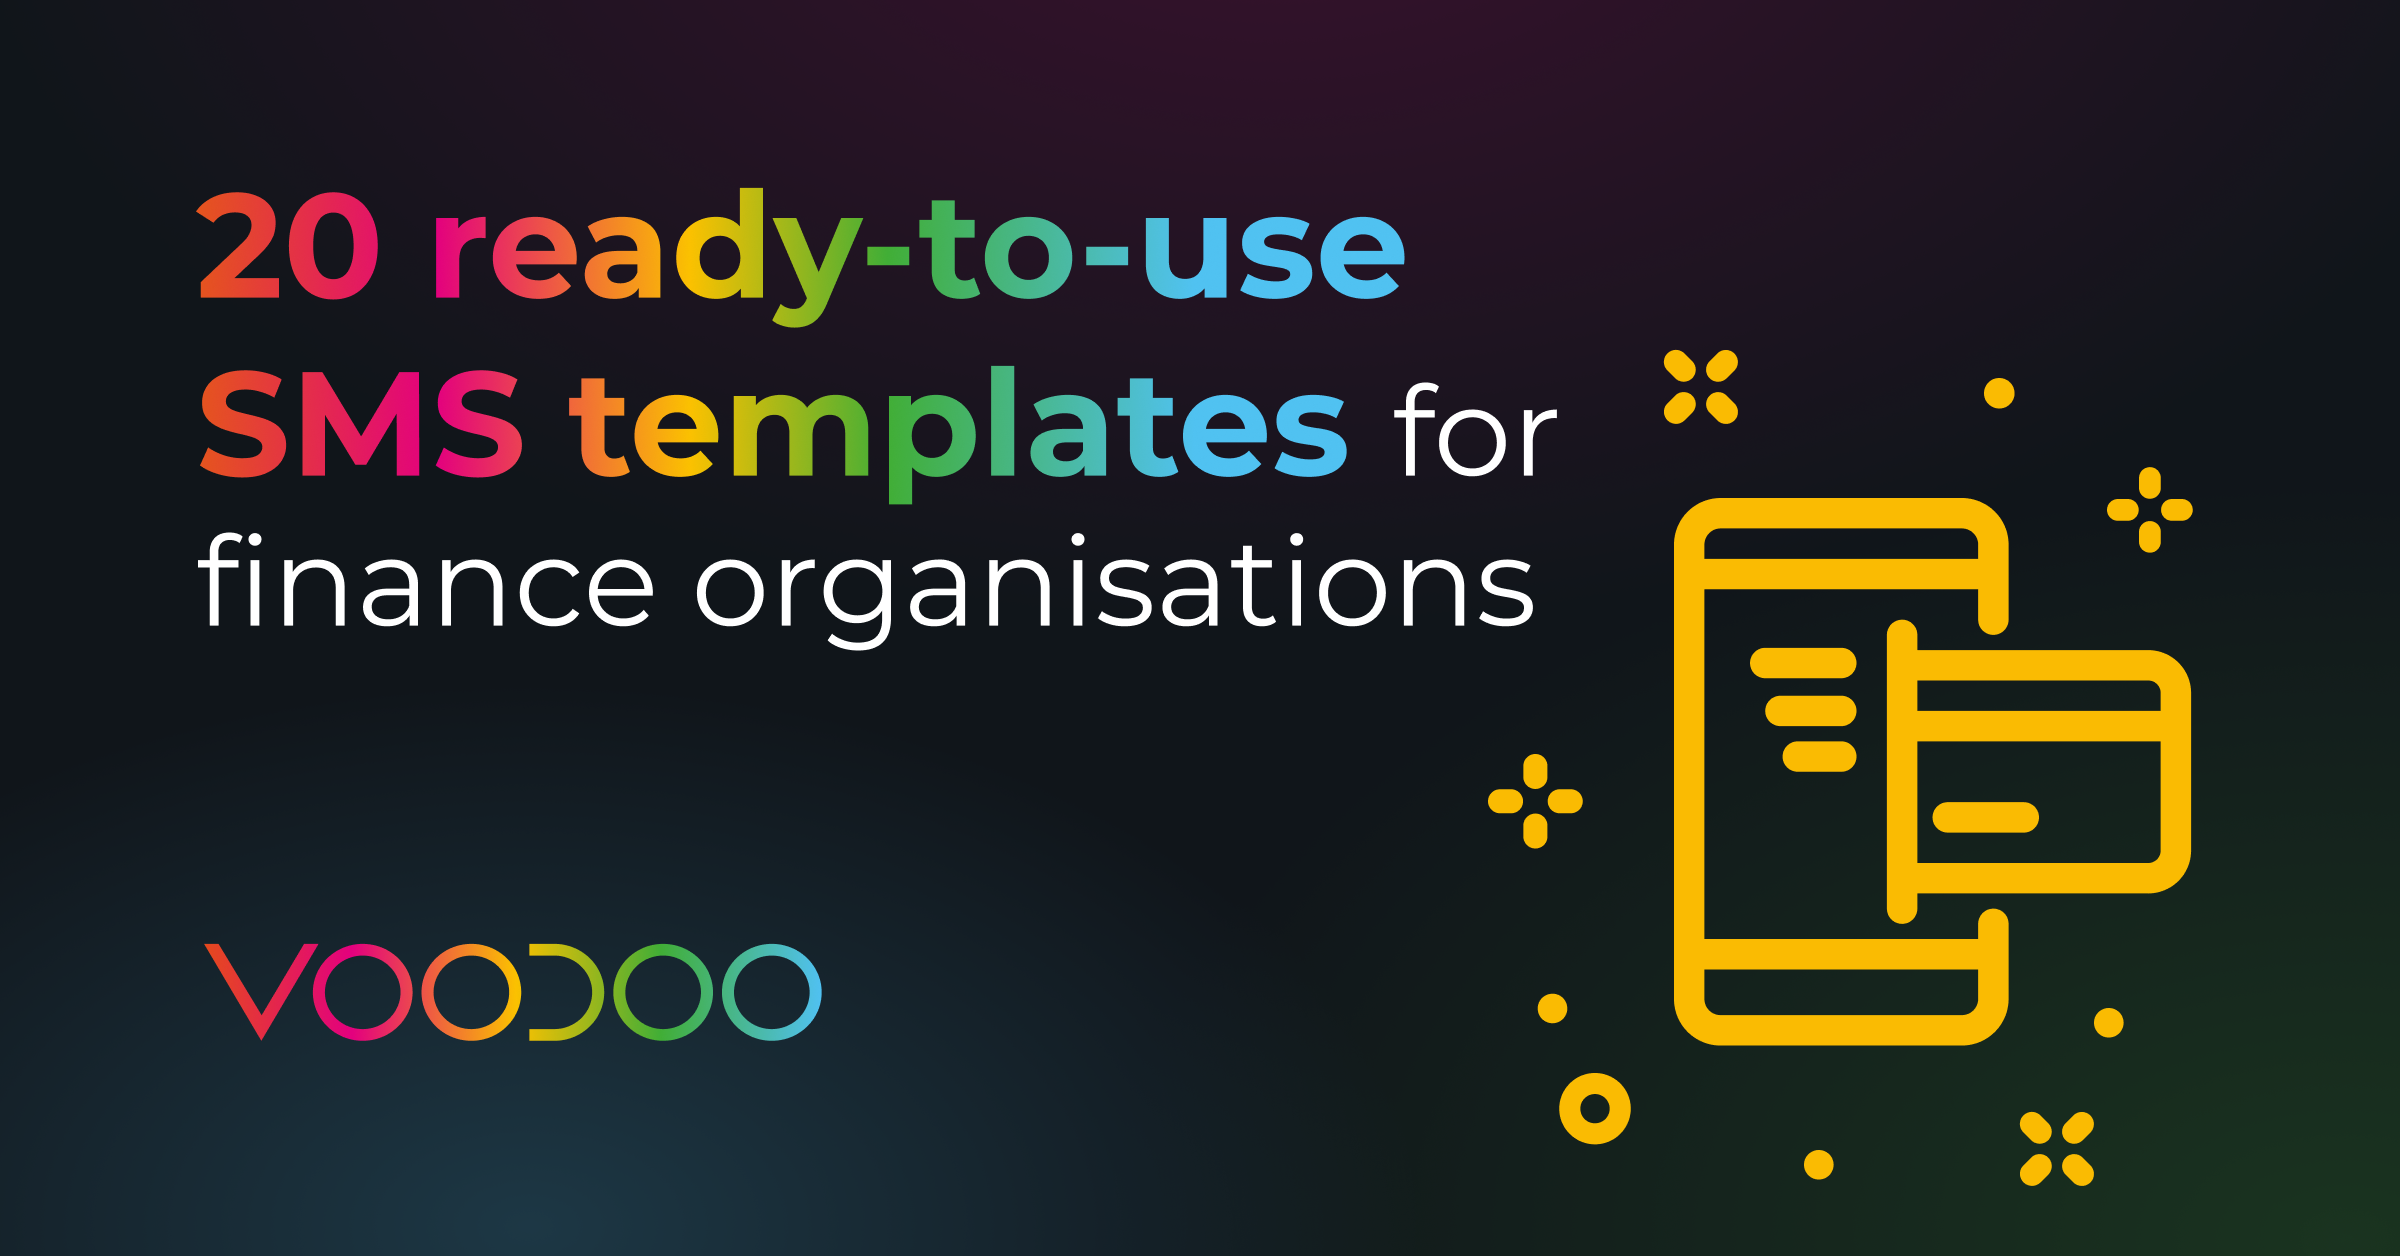 20 ready-to-use SMS templates for finance organisations